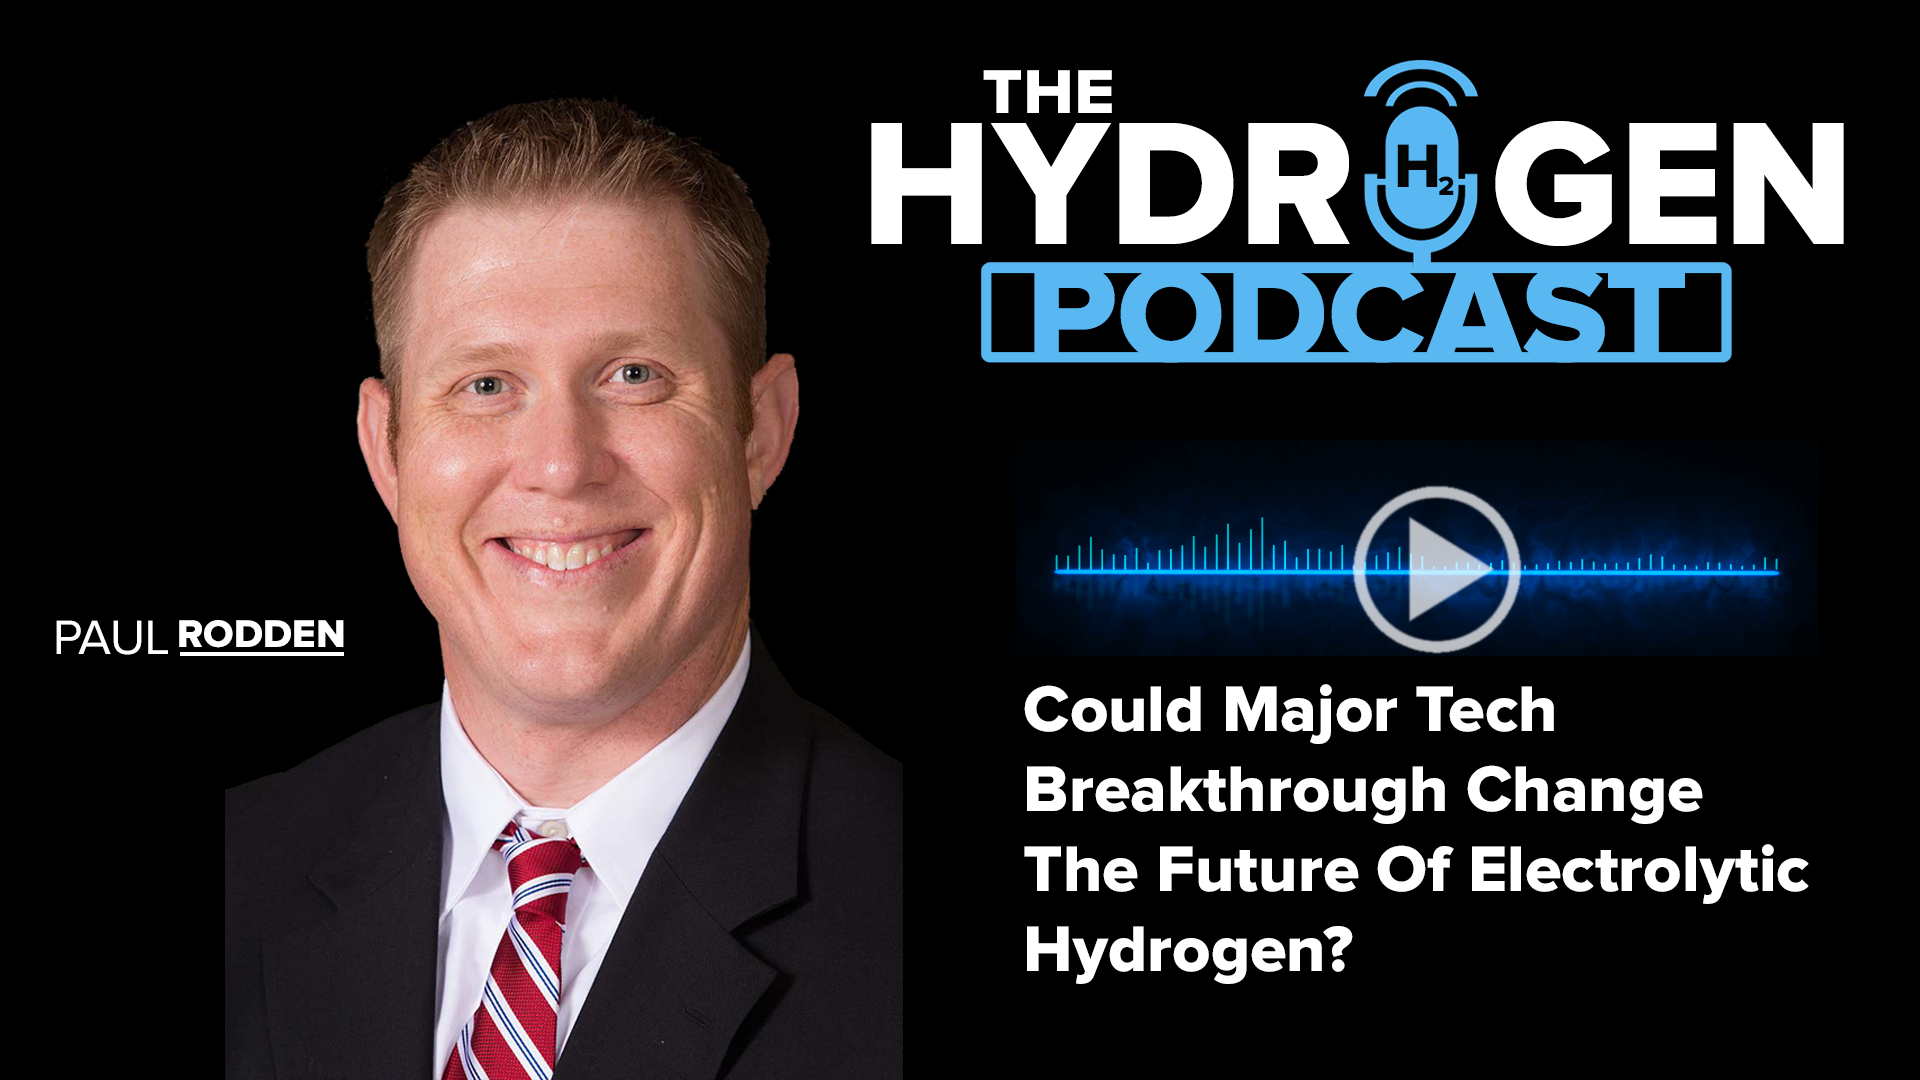 Could Major Tech Breakthrough Change The Future Of Electrolytic Hydrogen?